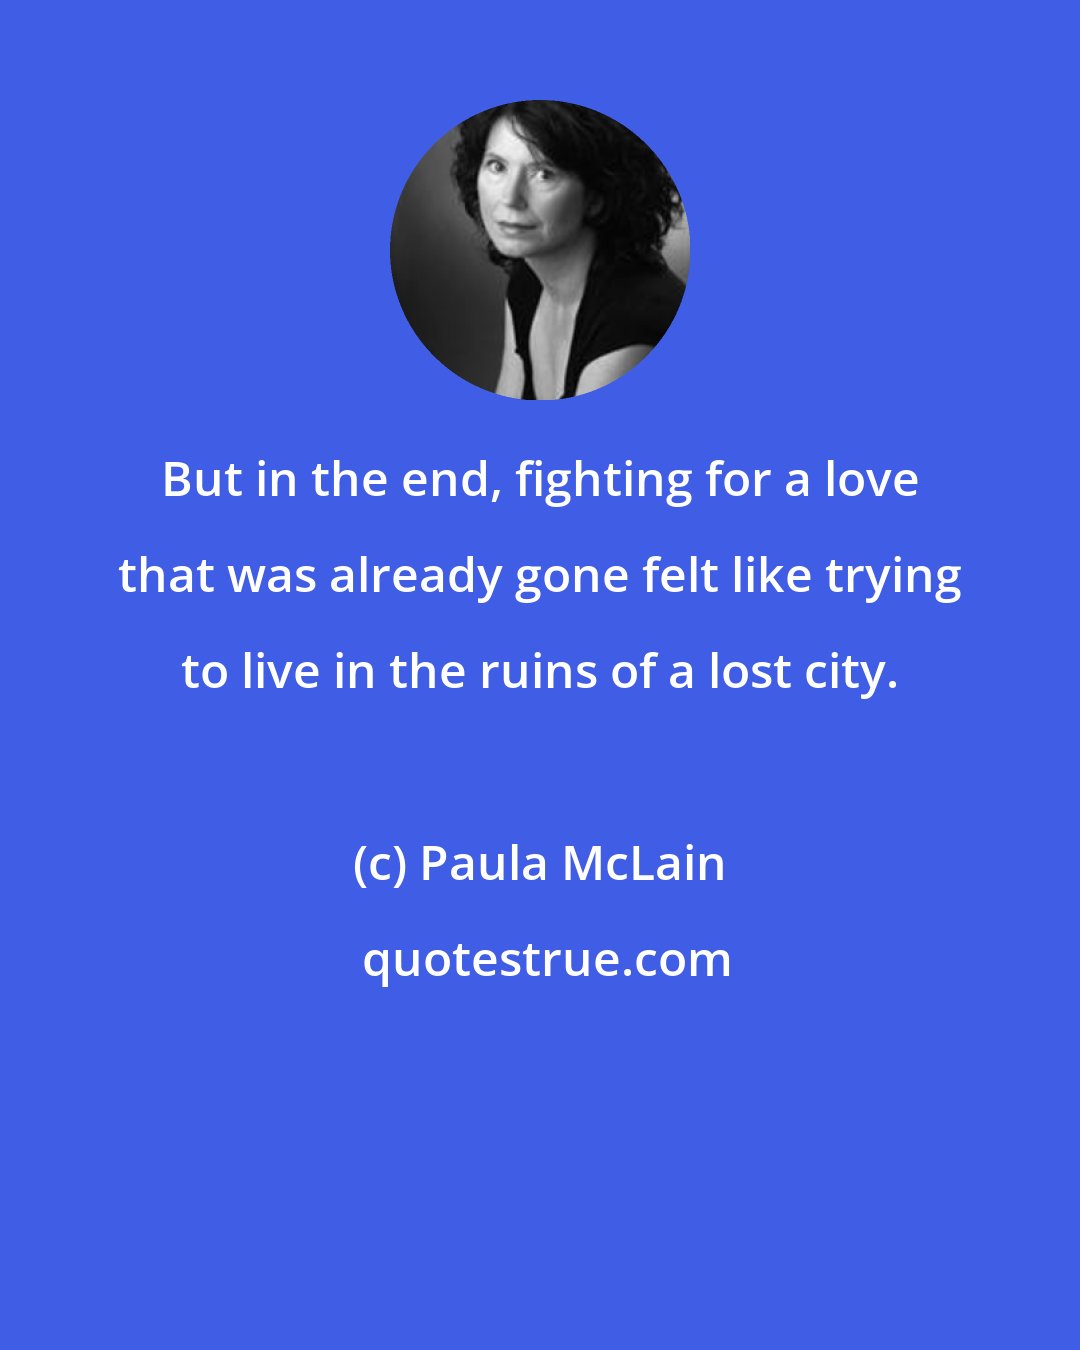 Paula McLain: But in the end, fighting for a love that was already gone felt like trying to live in the ruins of a lost city.